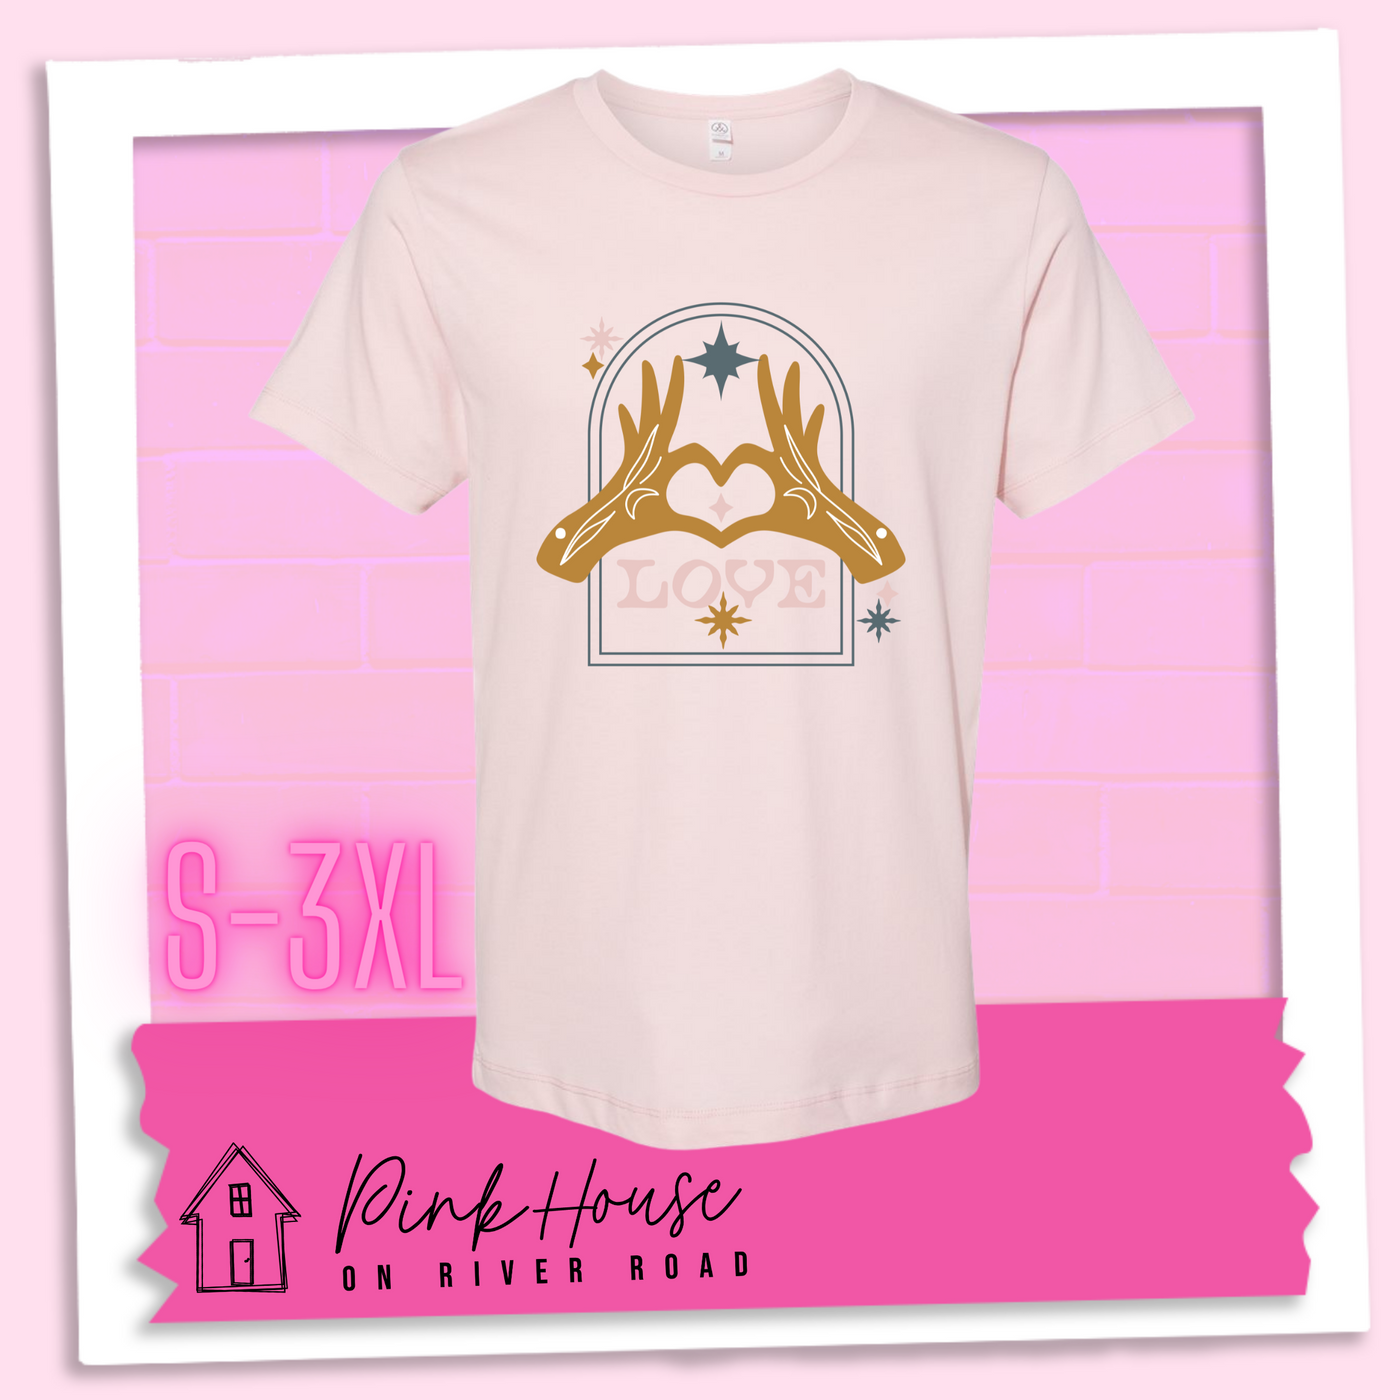 Faded Pink Jersey tee with a graphic. Graphic is of two tattooed hands making a heart in front of an archway with stars and the word Love in the archway.